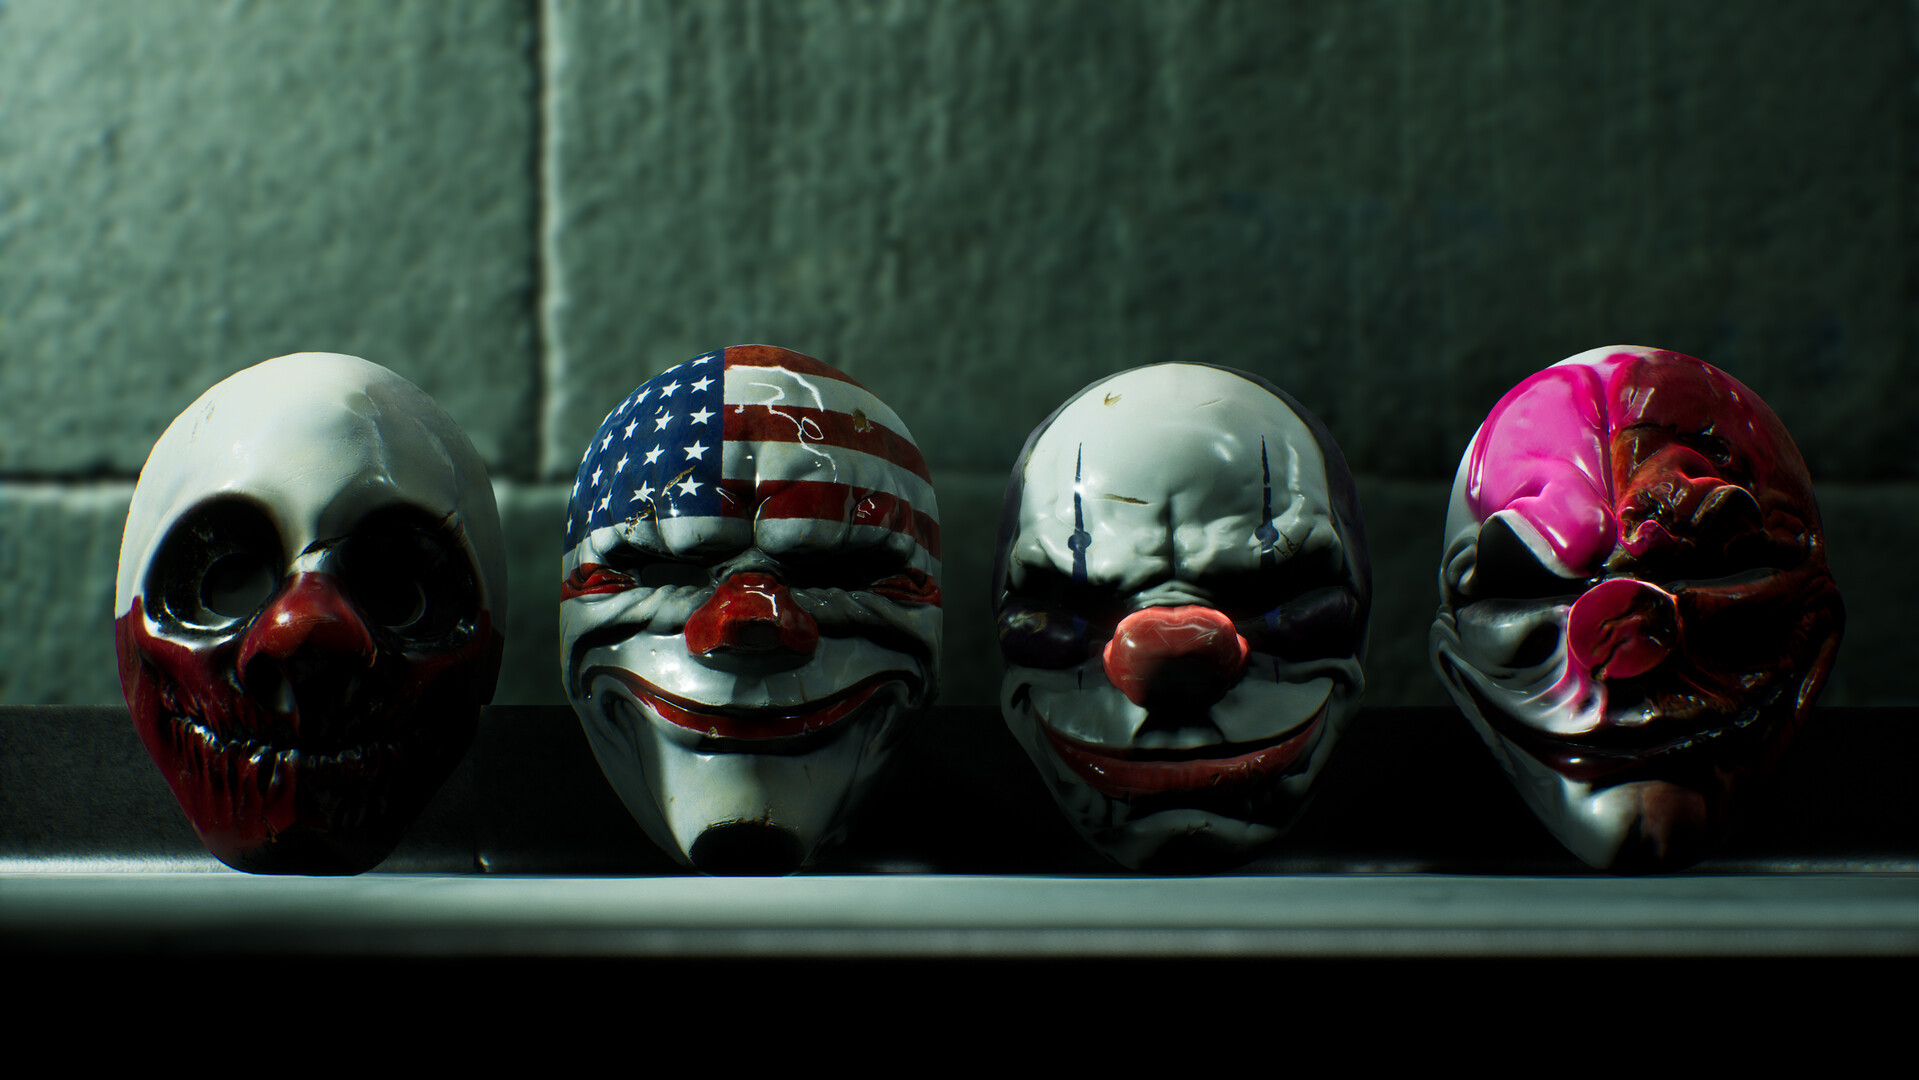 PAYDAY 3 Epic Games Account